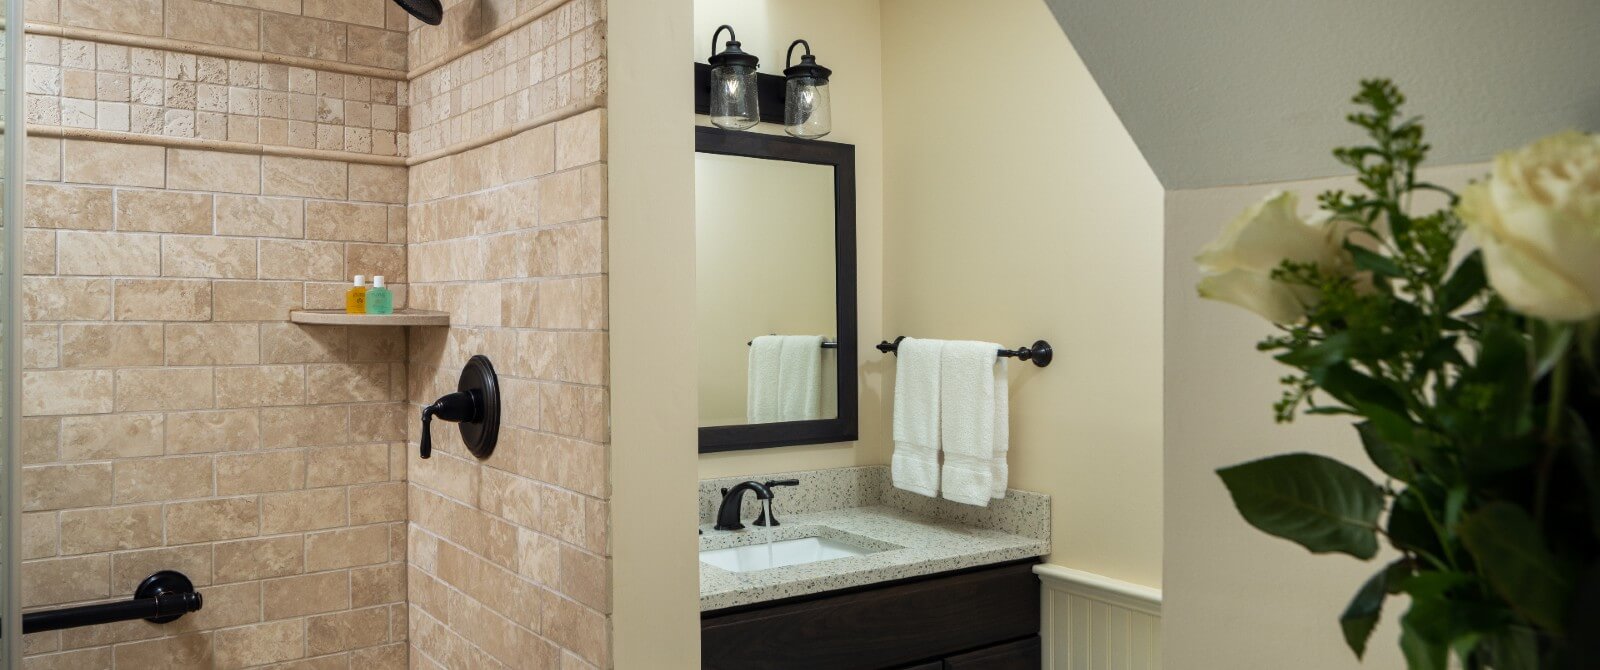 Shower with brown tile and glass doors by sink vanity under framed mirror